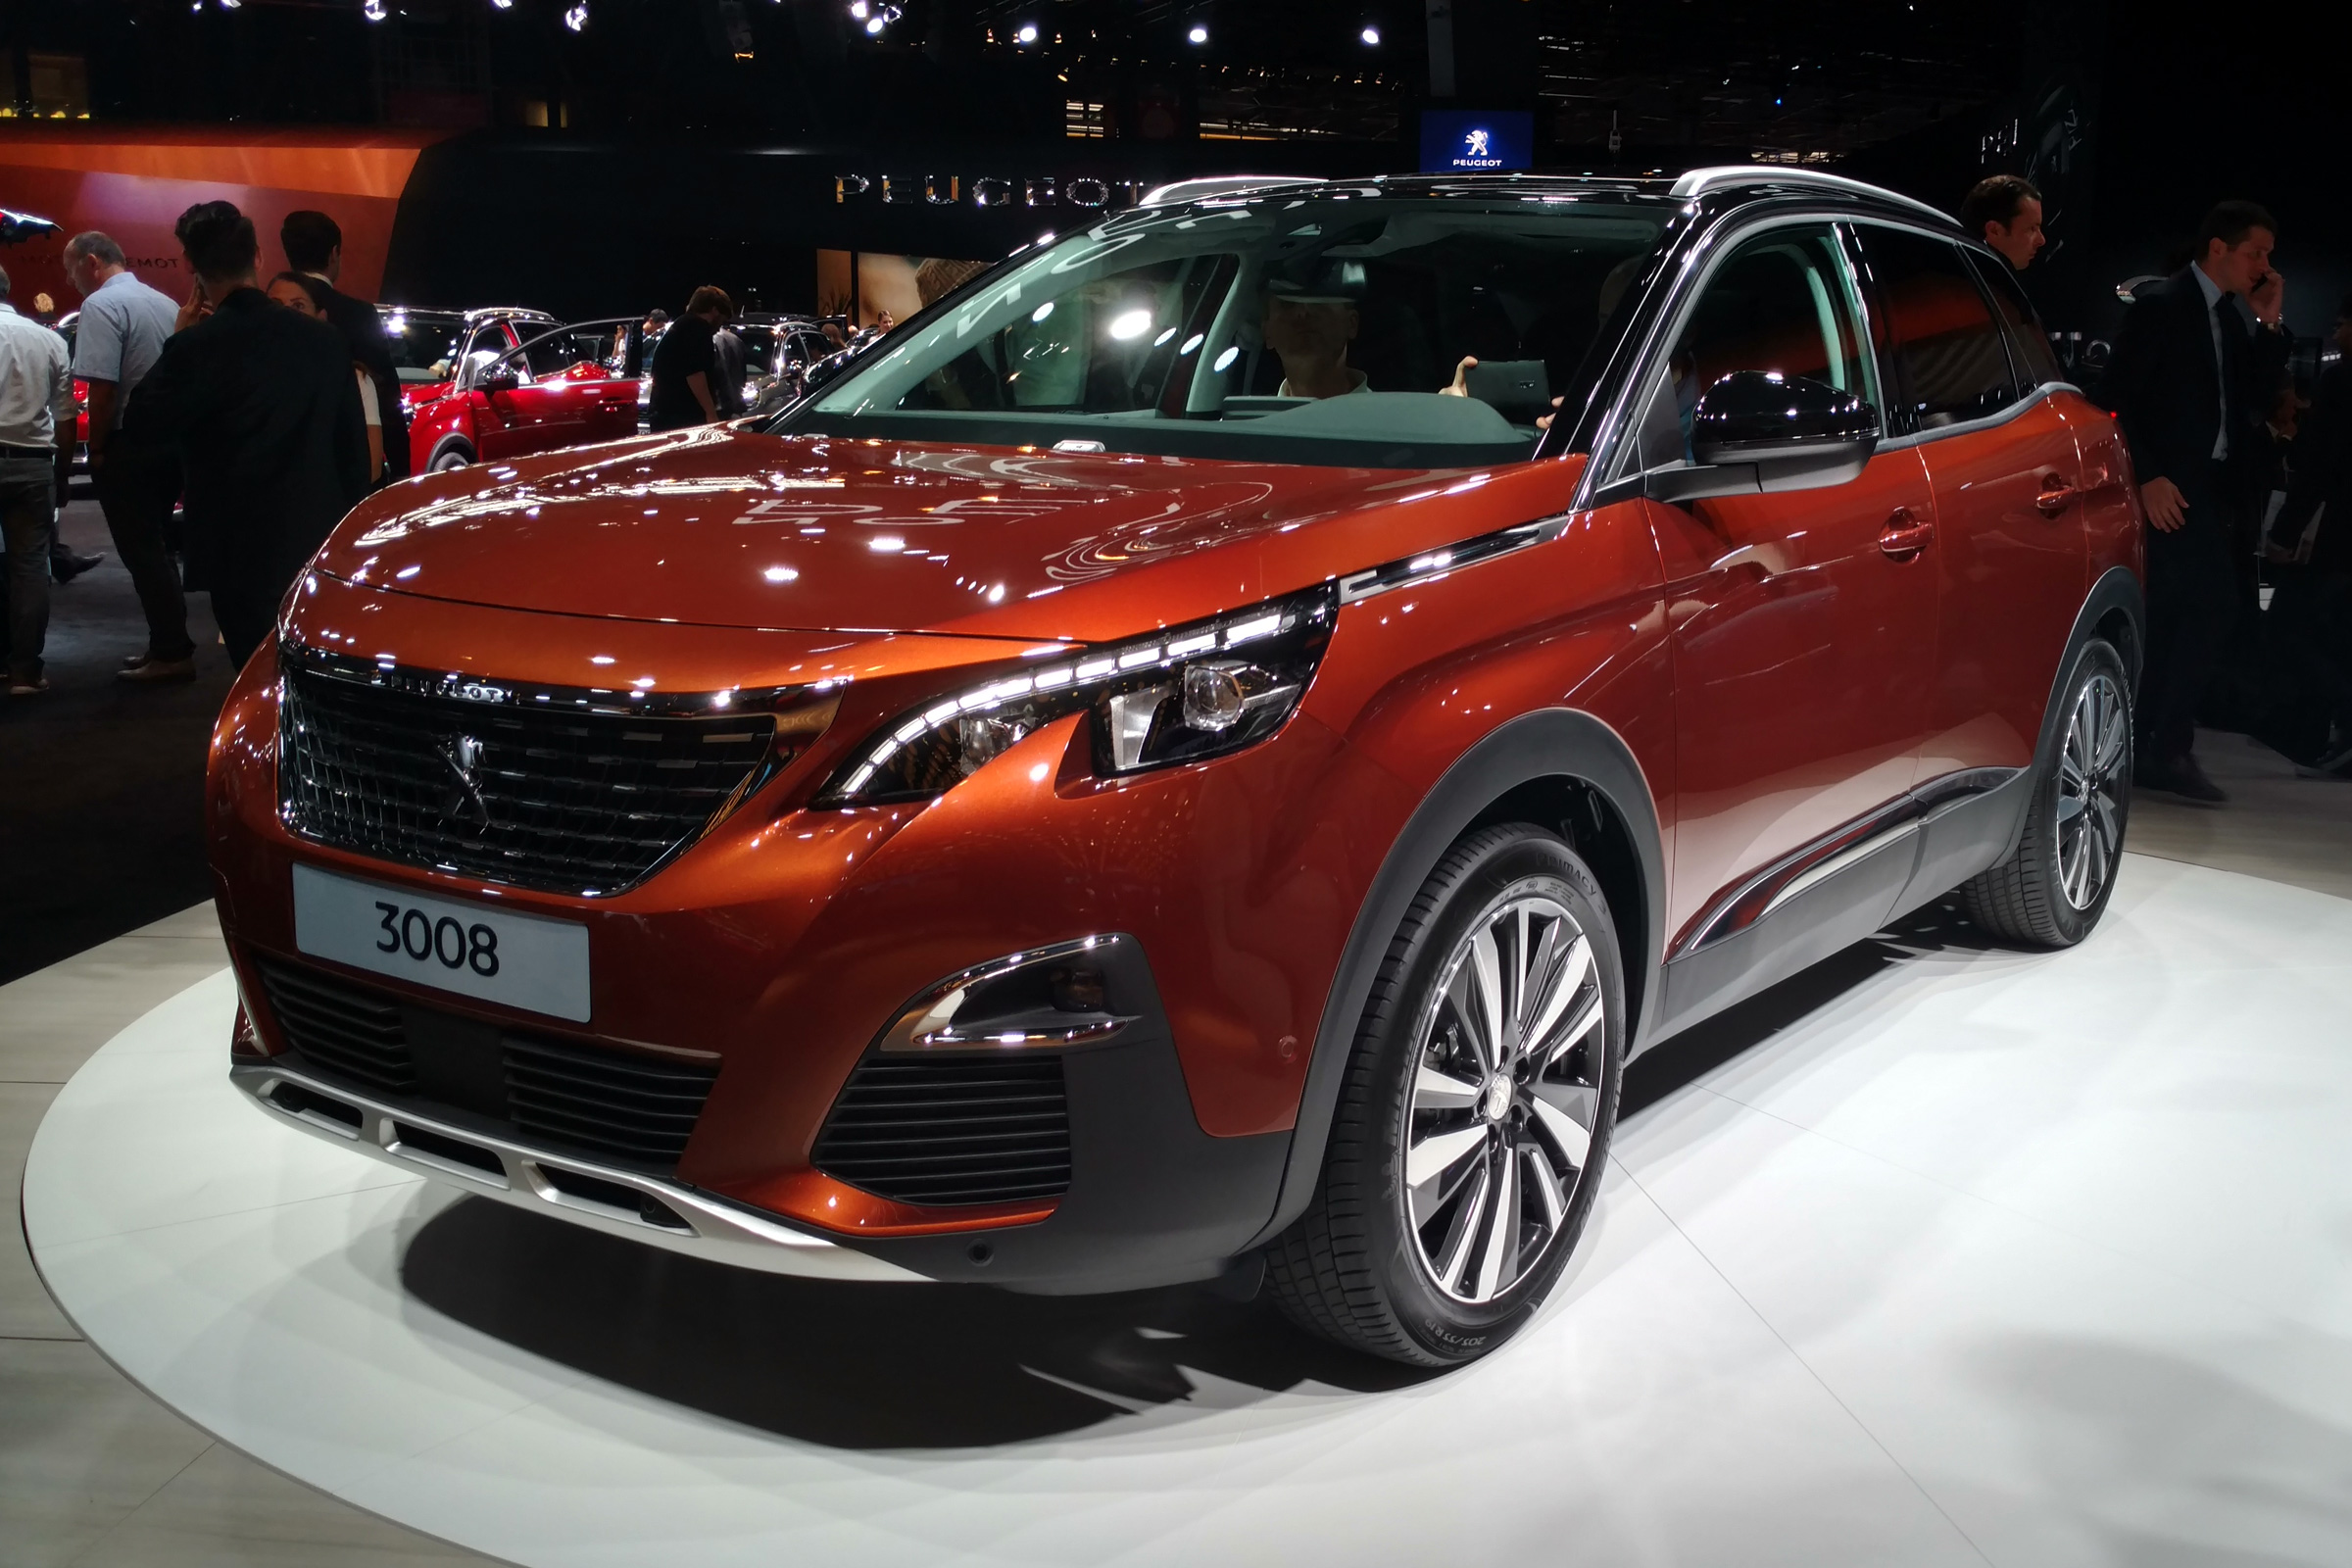 New Peugeot 3008 prices, specs & release date  Carbuyer